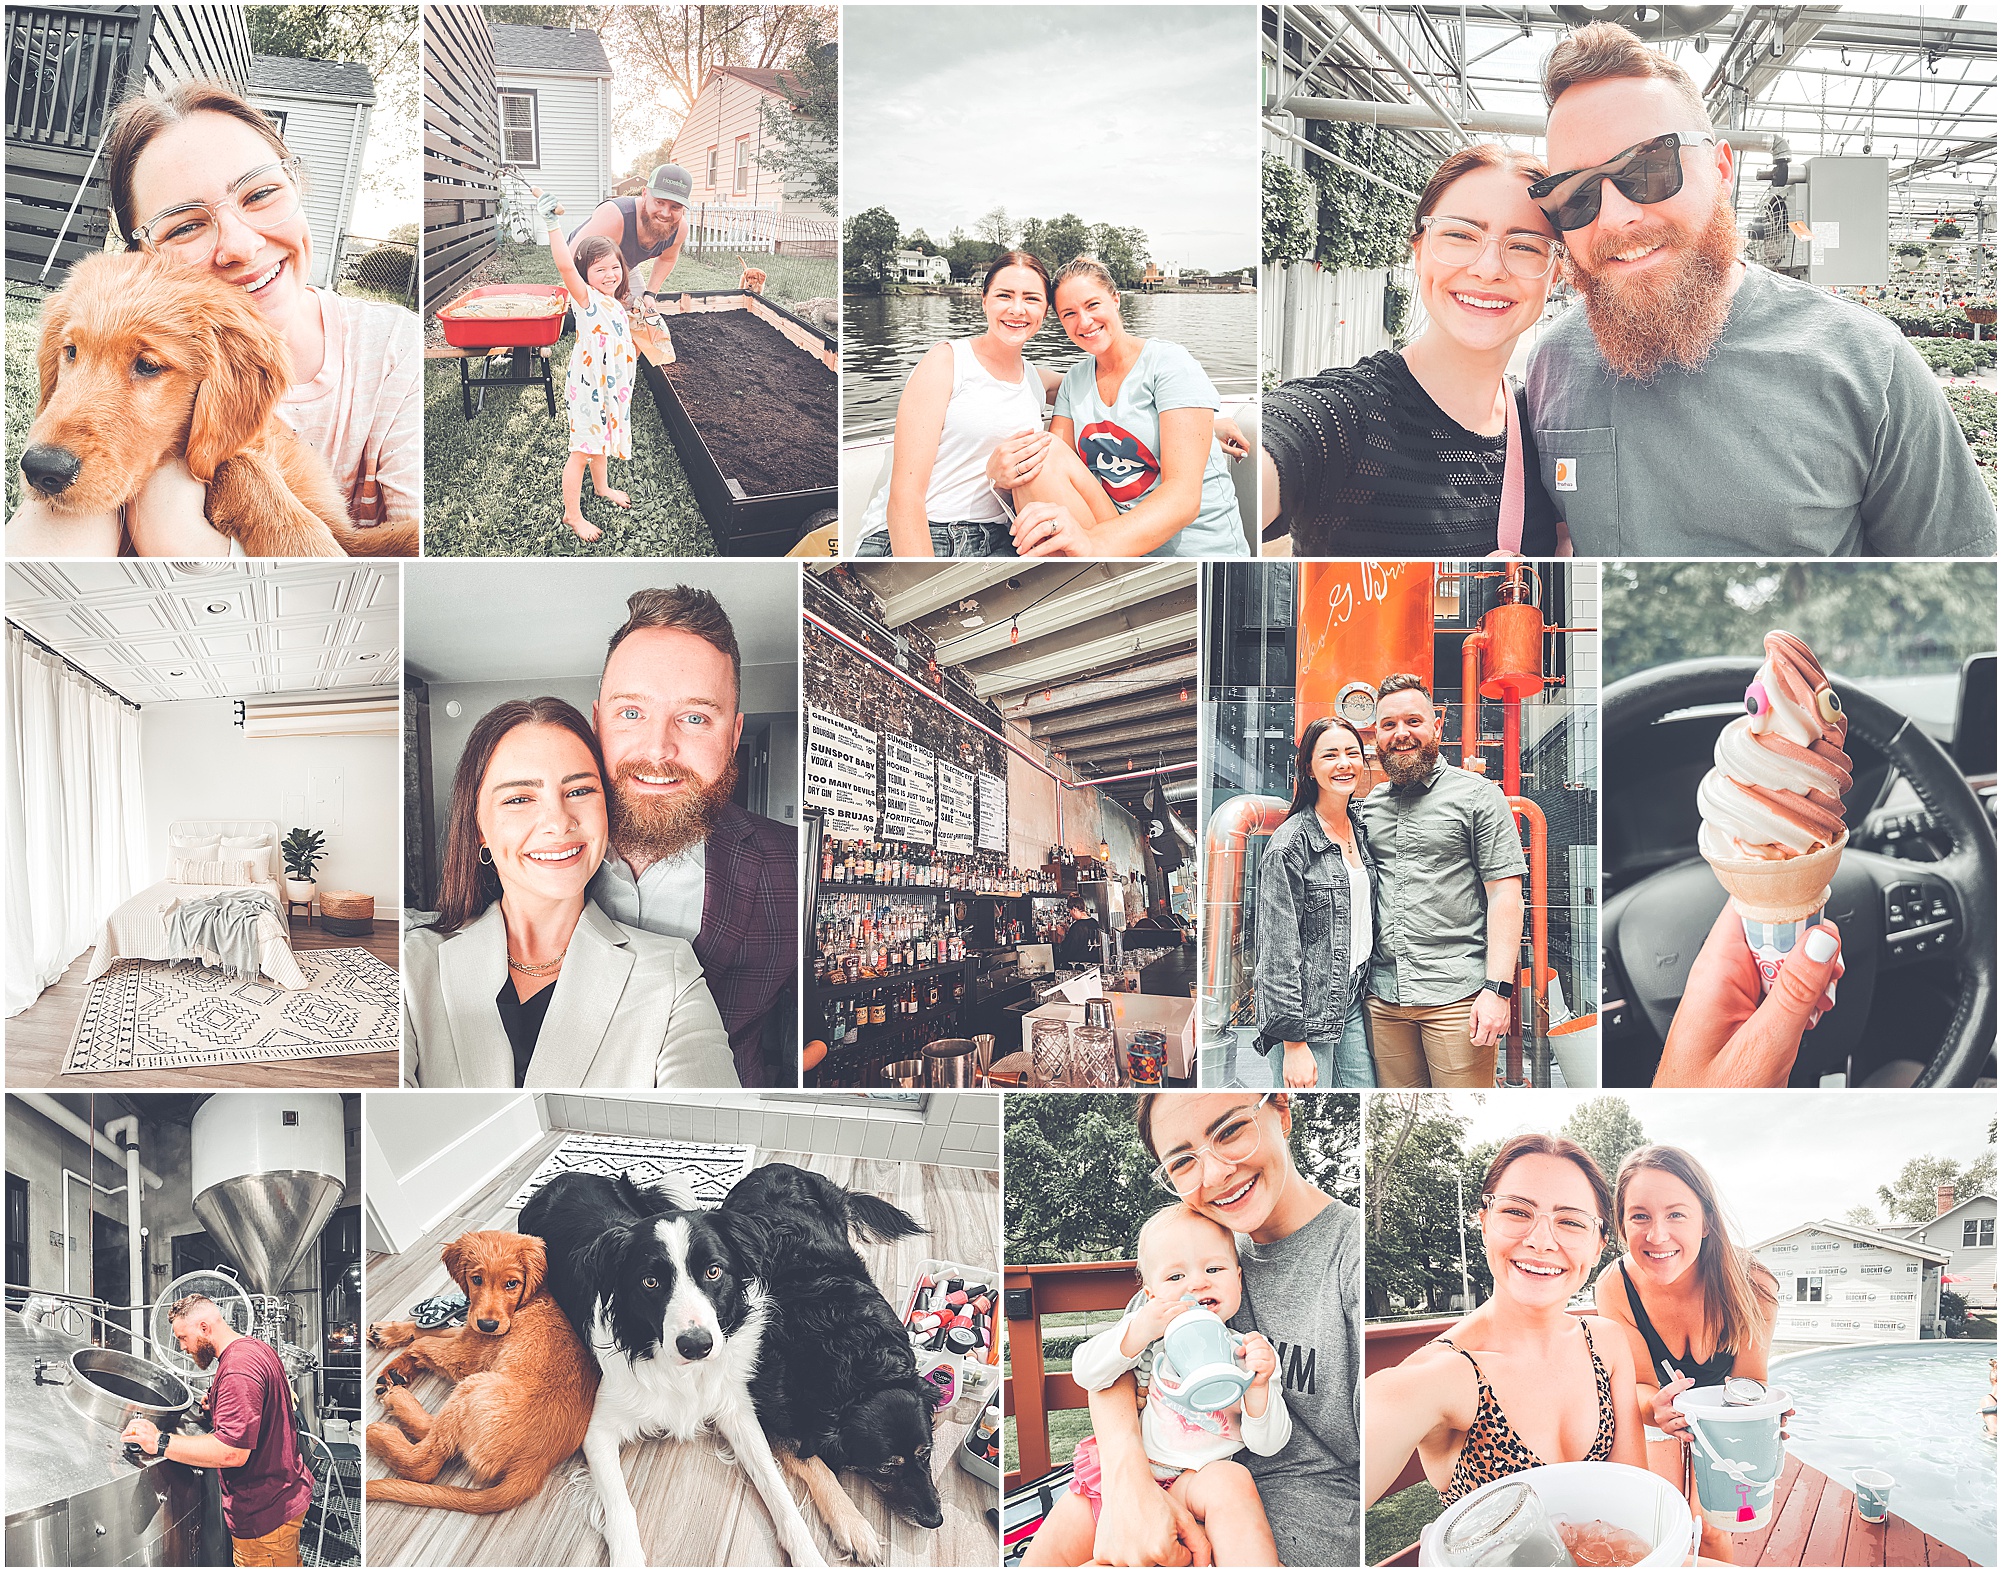 A look at the May 2022 My Life Mondays monthly blog recap with Chicagoland wedding photographer and mentor Kara Evans Photographer.